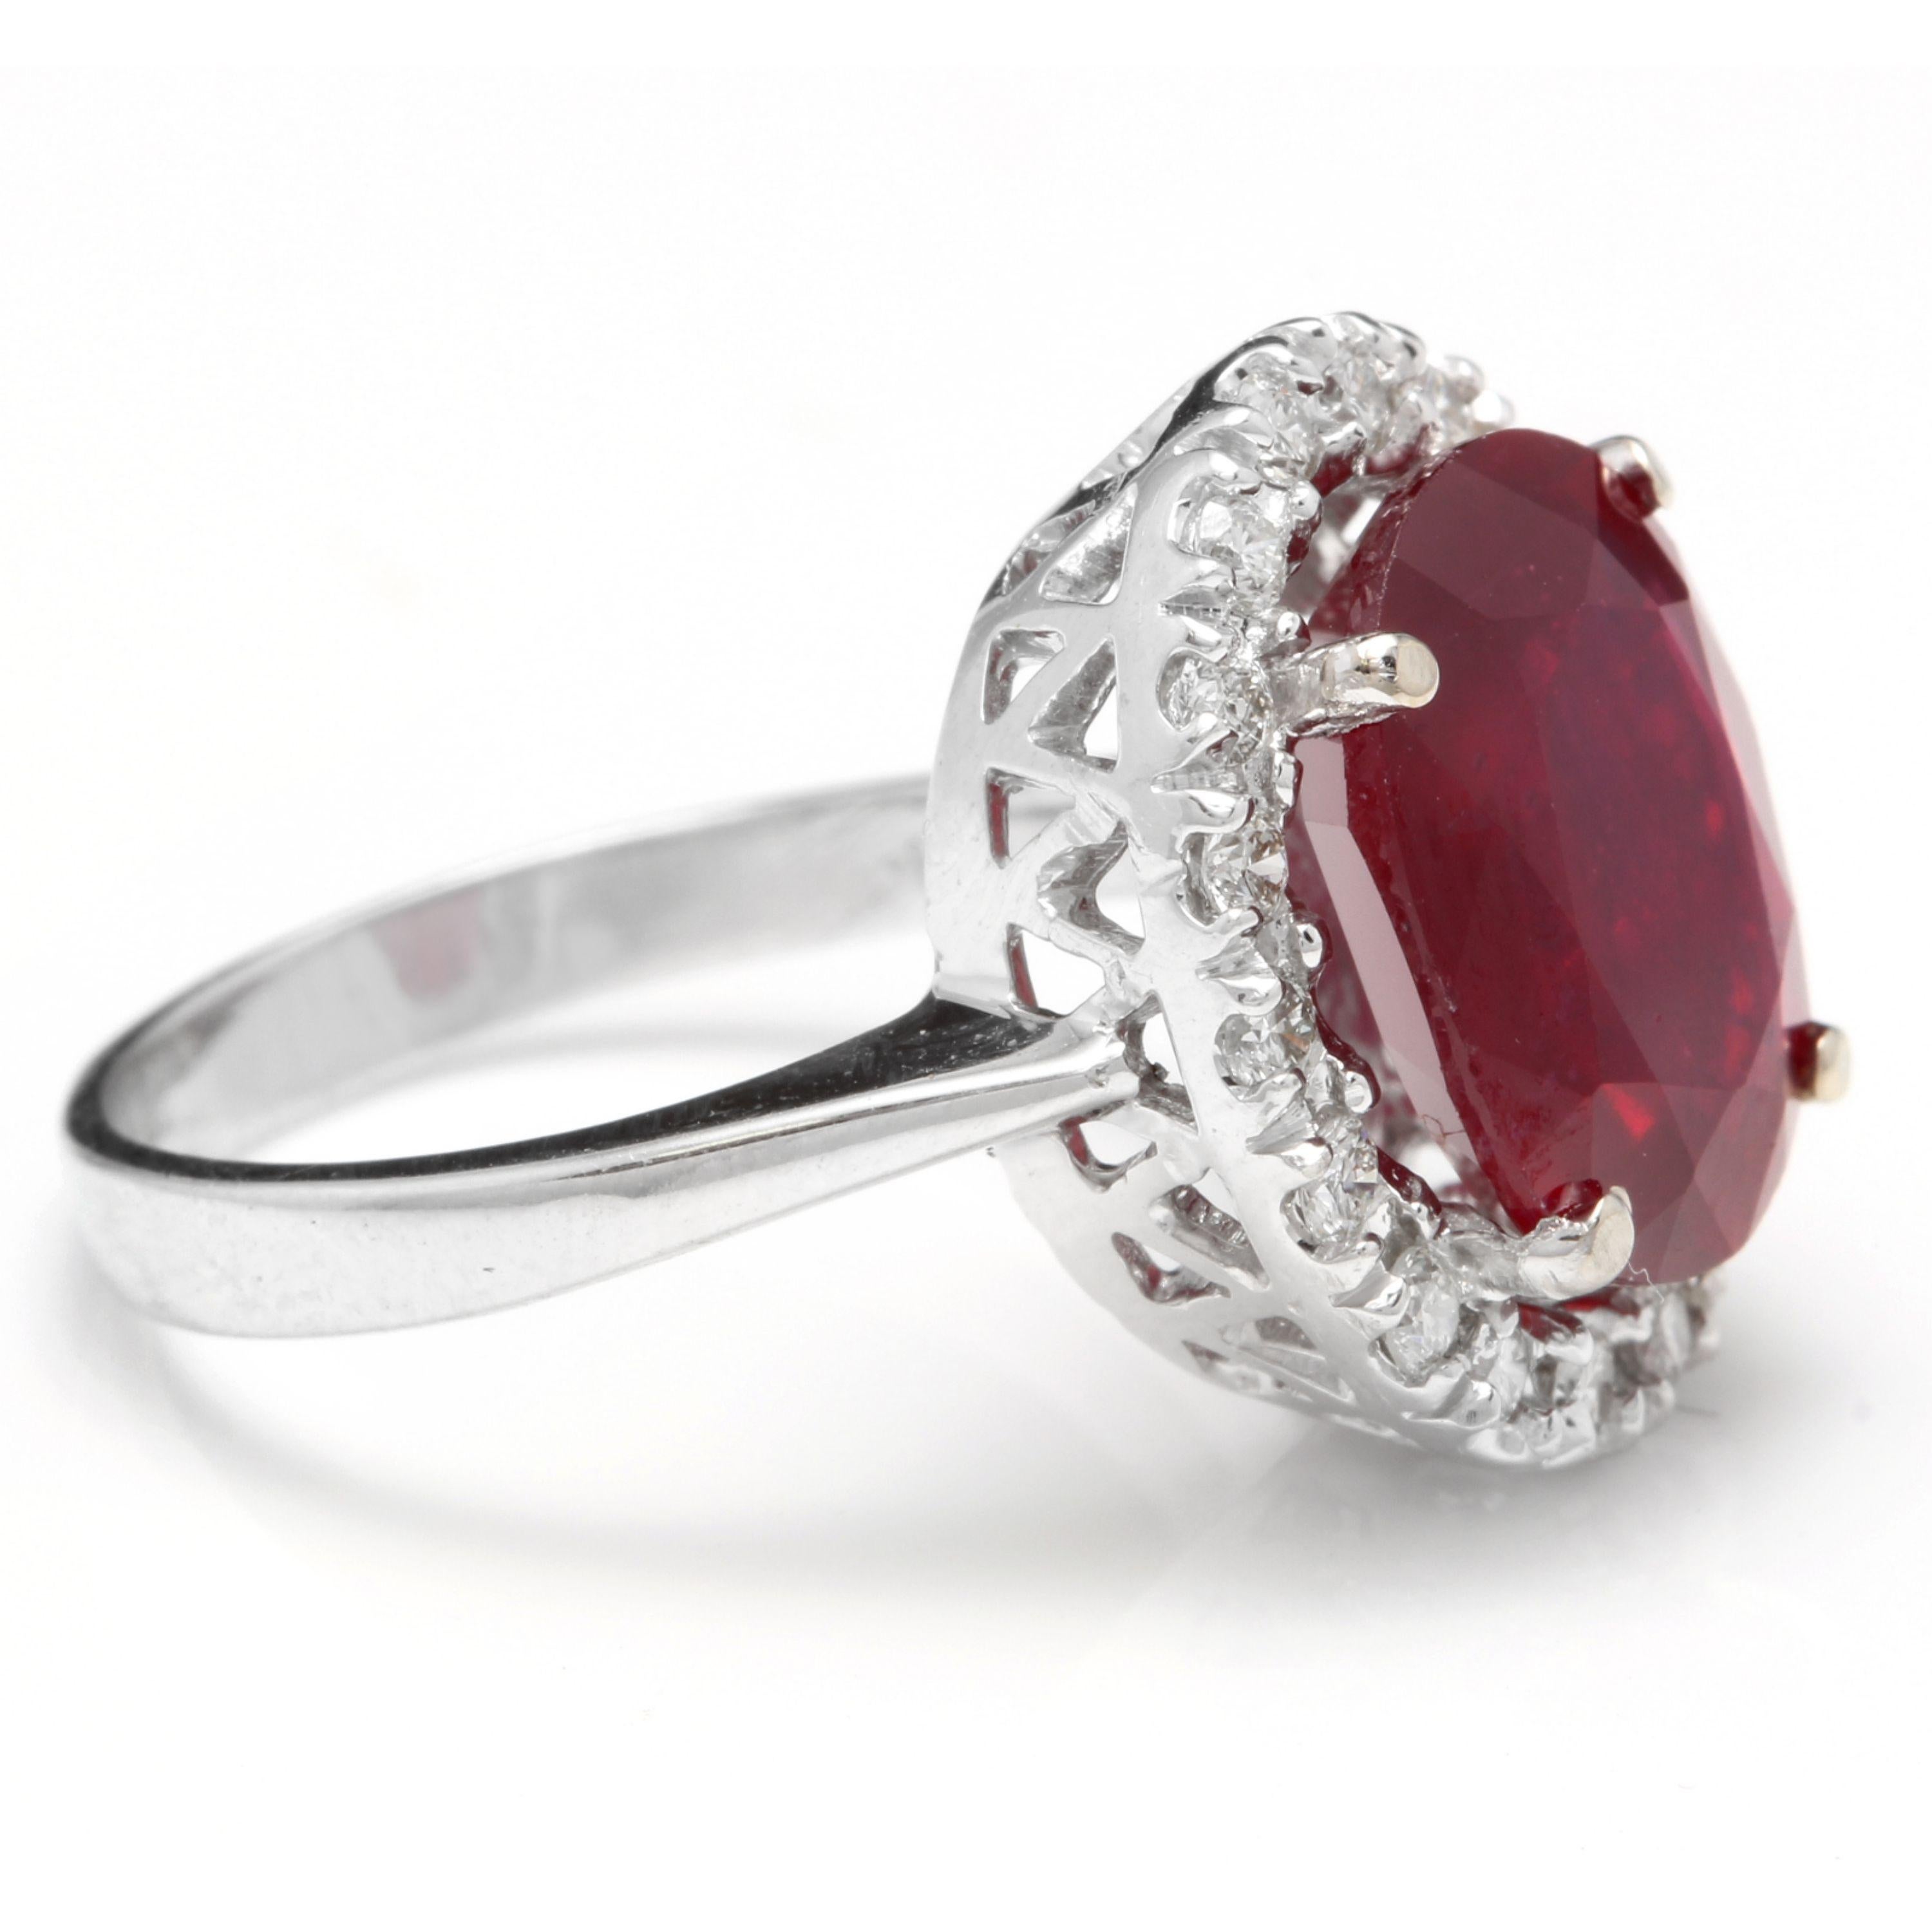 Mixed Cut 8.80 Carat Impressive Natural Red Ruby and Diamond 14 Karat White Gold Ring For Sale